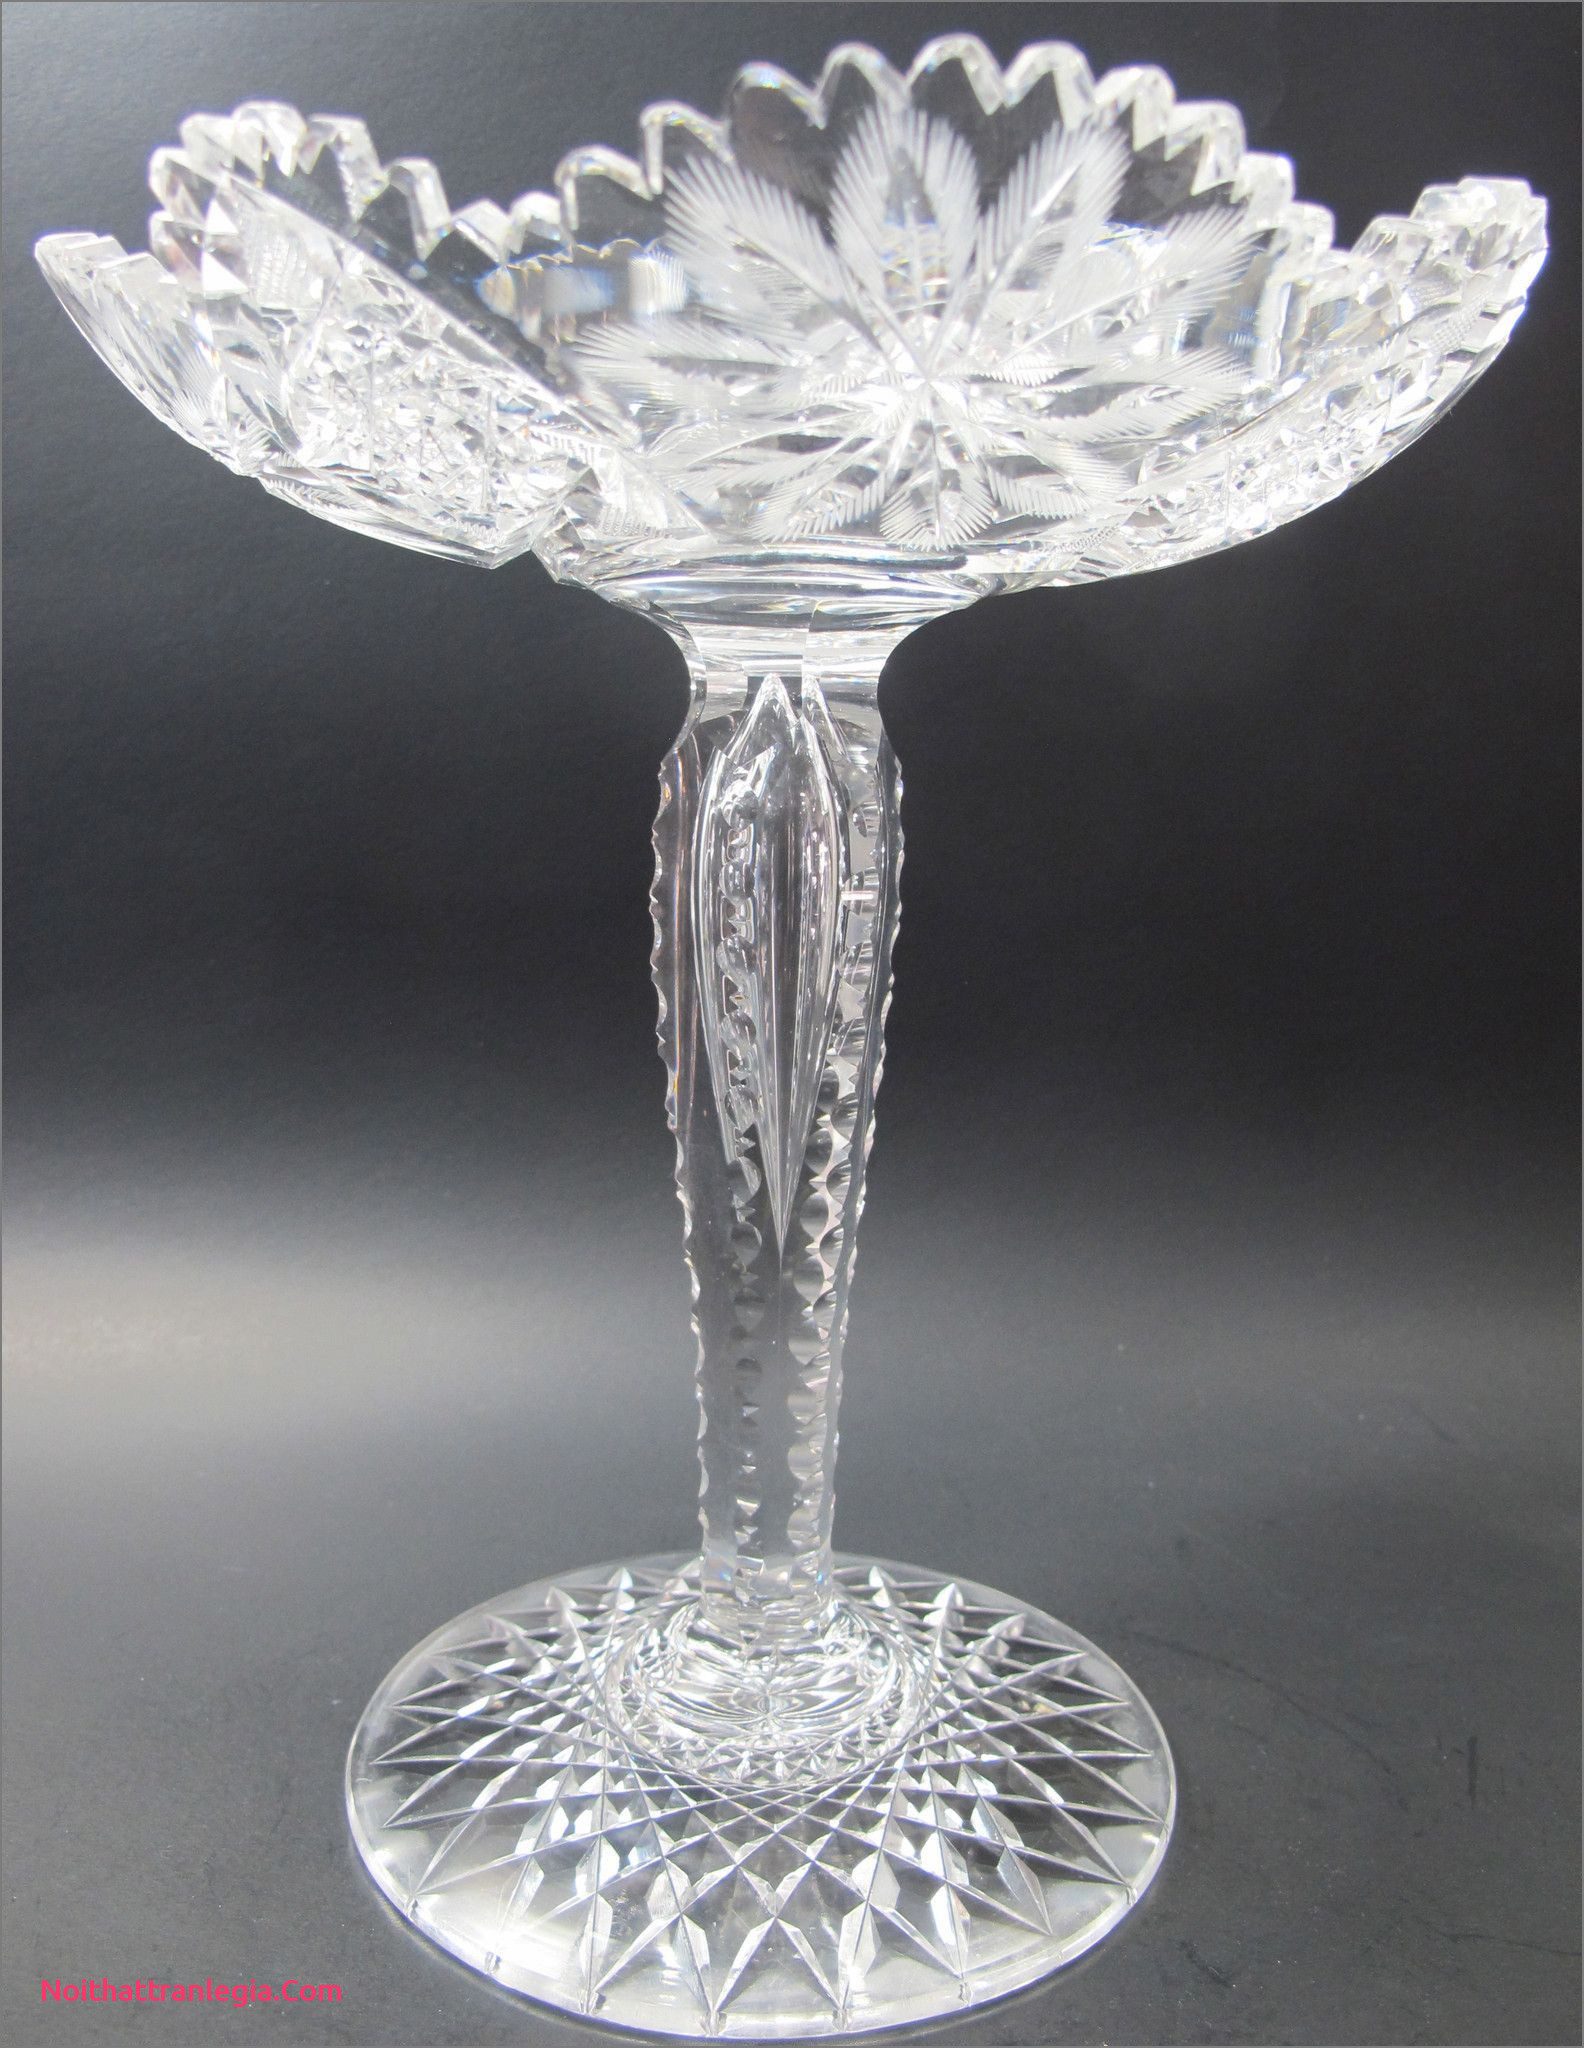 18 Ideal Antique Crystal Vases Value 2024 free download antique crystal vases value of 20 cut glass antique vase noithattranlegia vases design with fering this abp antique cut glass pote from the american brilliant period 1886 1916 9 5